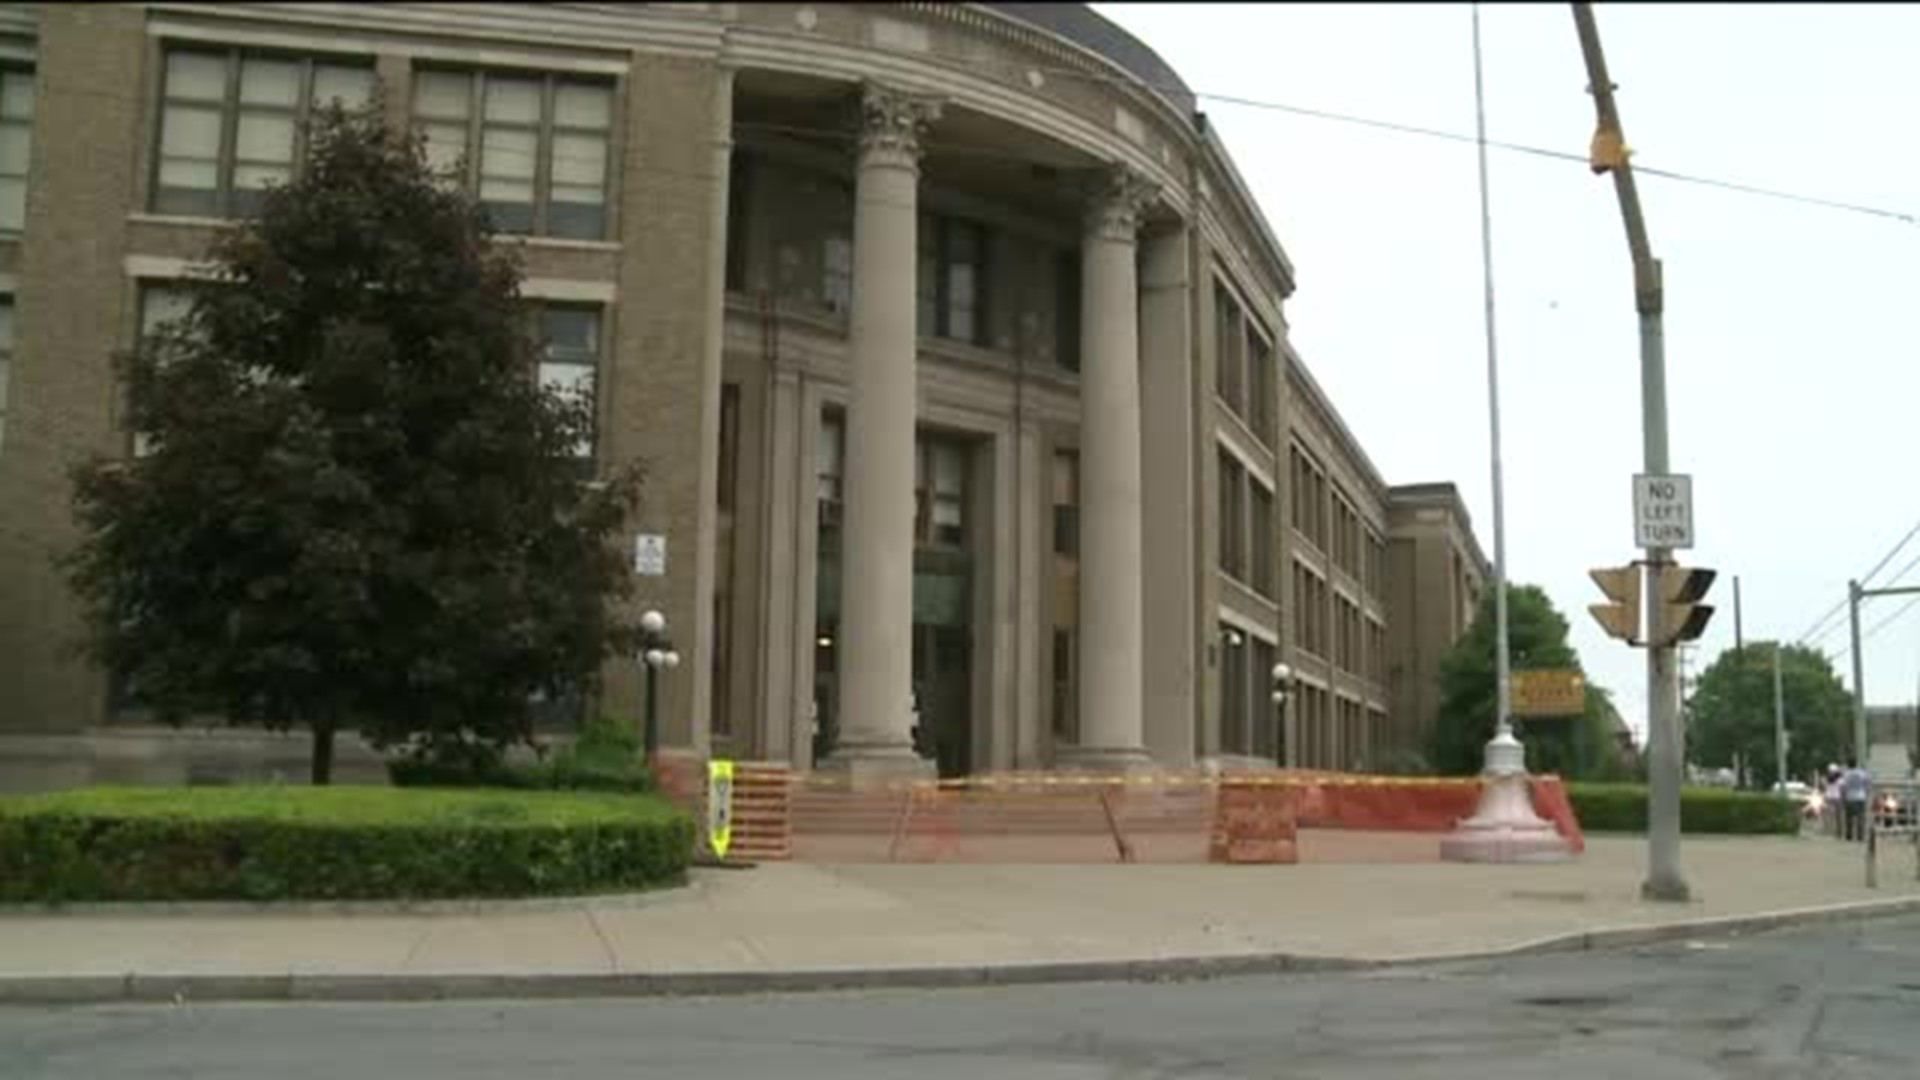 Potential Structural Problems at Another School in Wilkes-Barre